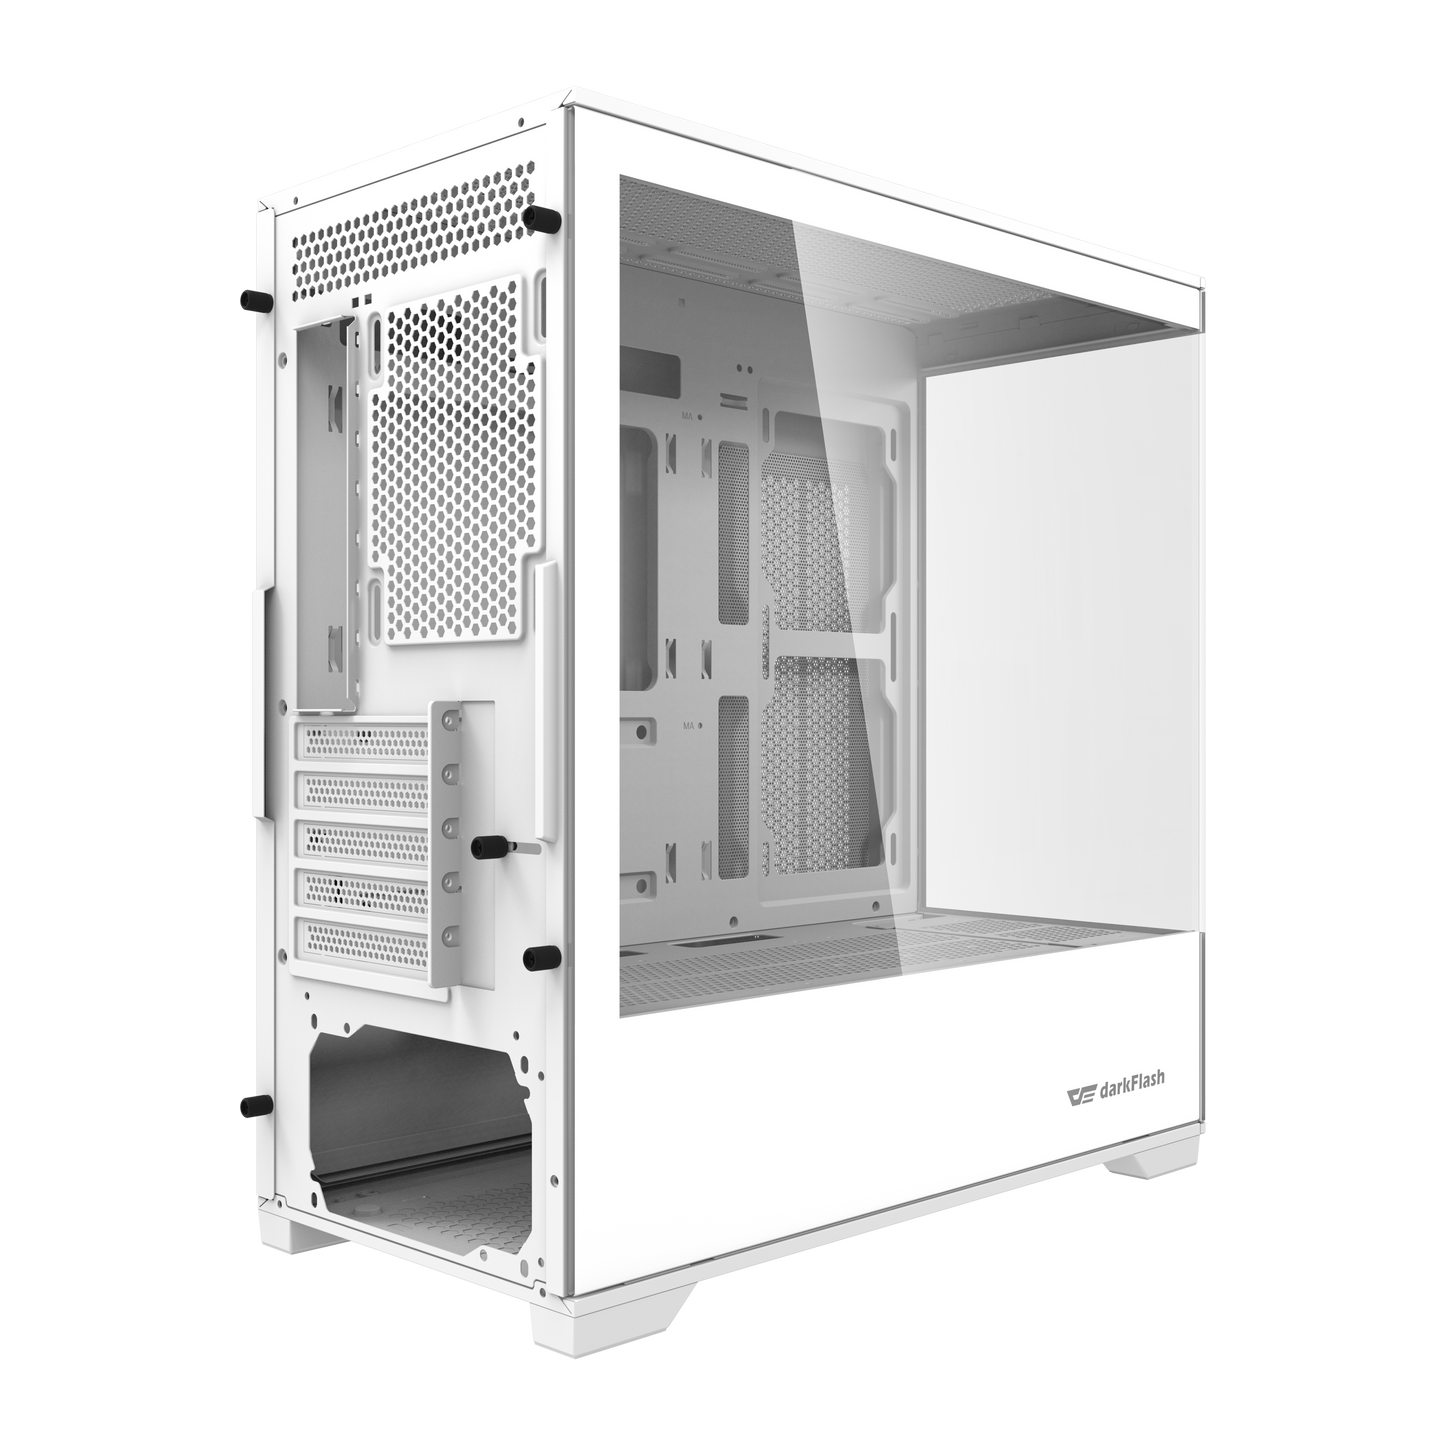 DarkFlash Computer PC Case Micro-ATX Gaming Tower without Fan (DK415P) (White)